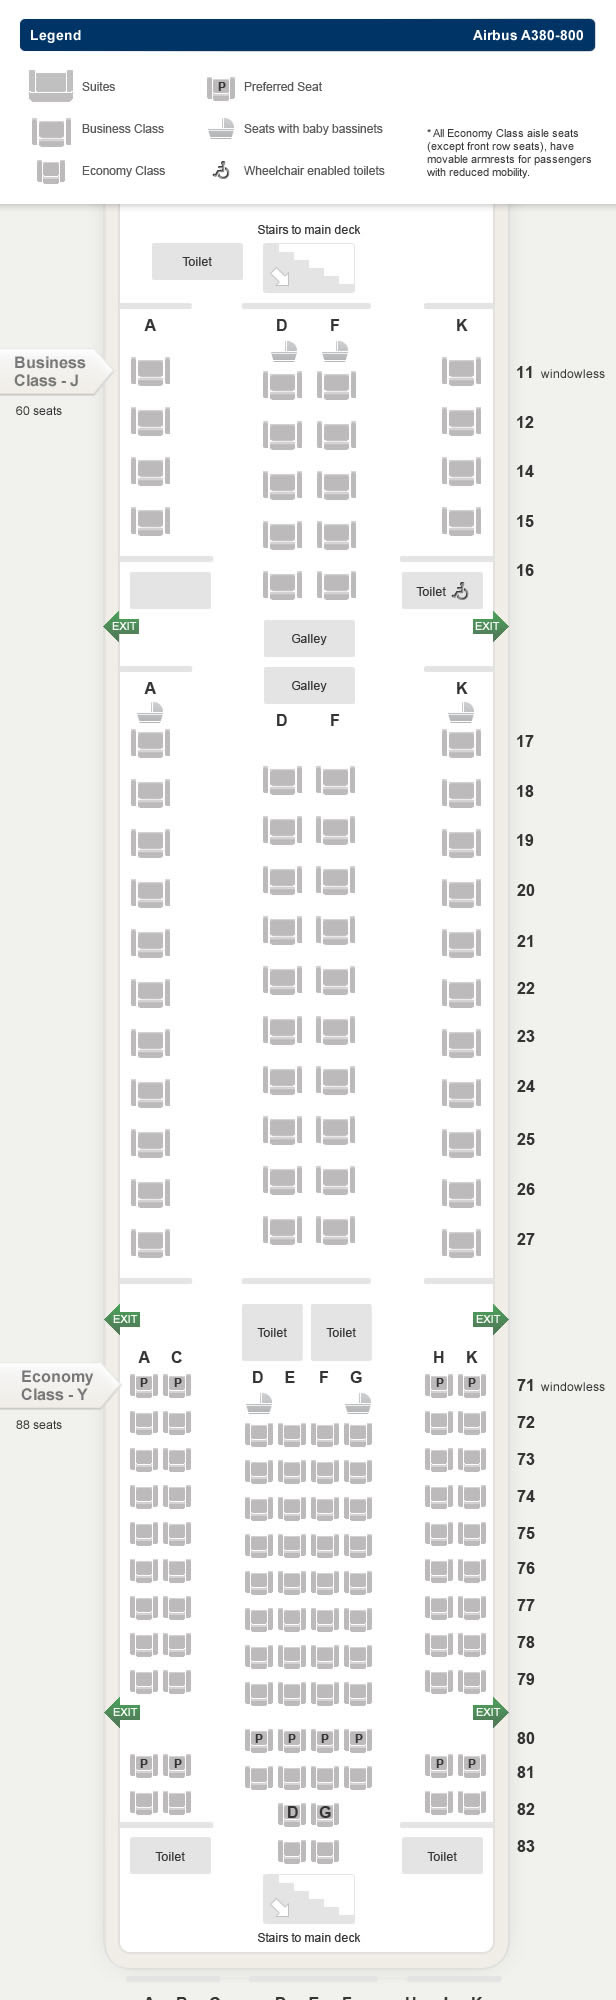 SINGAPORE AIR AIRLINES AIRBUS A380-800 AIRCRAFT SEATING CHART